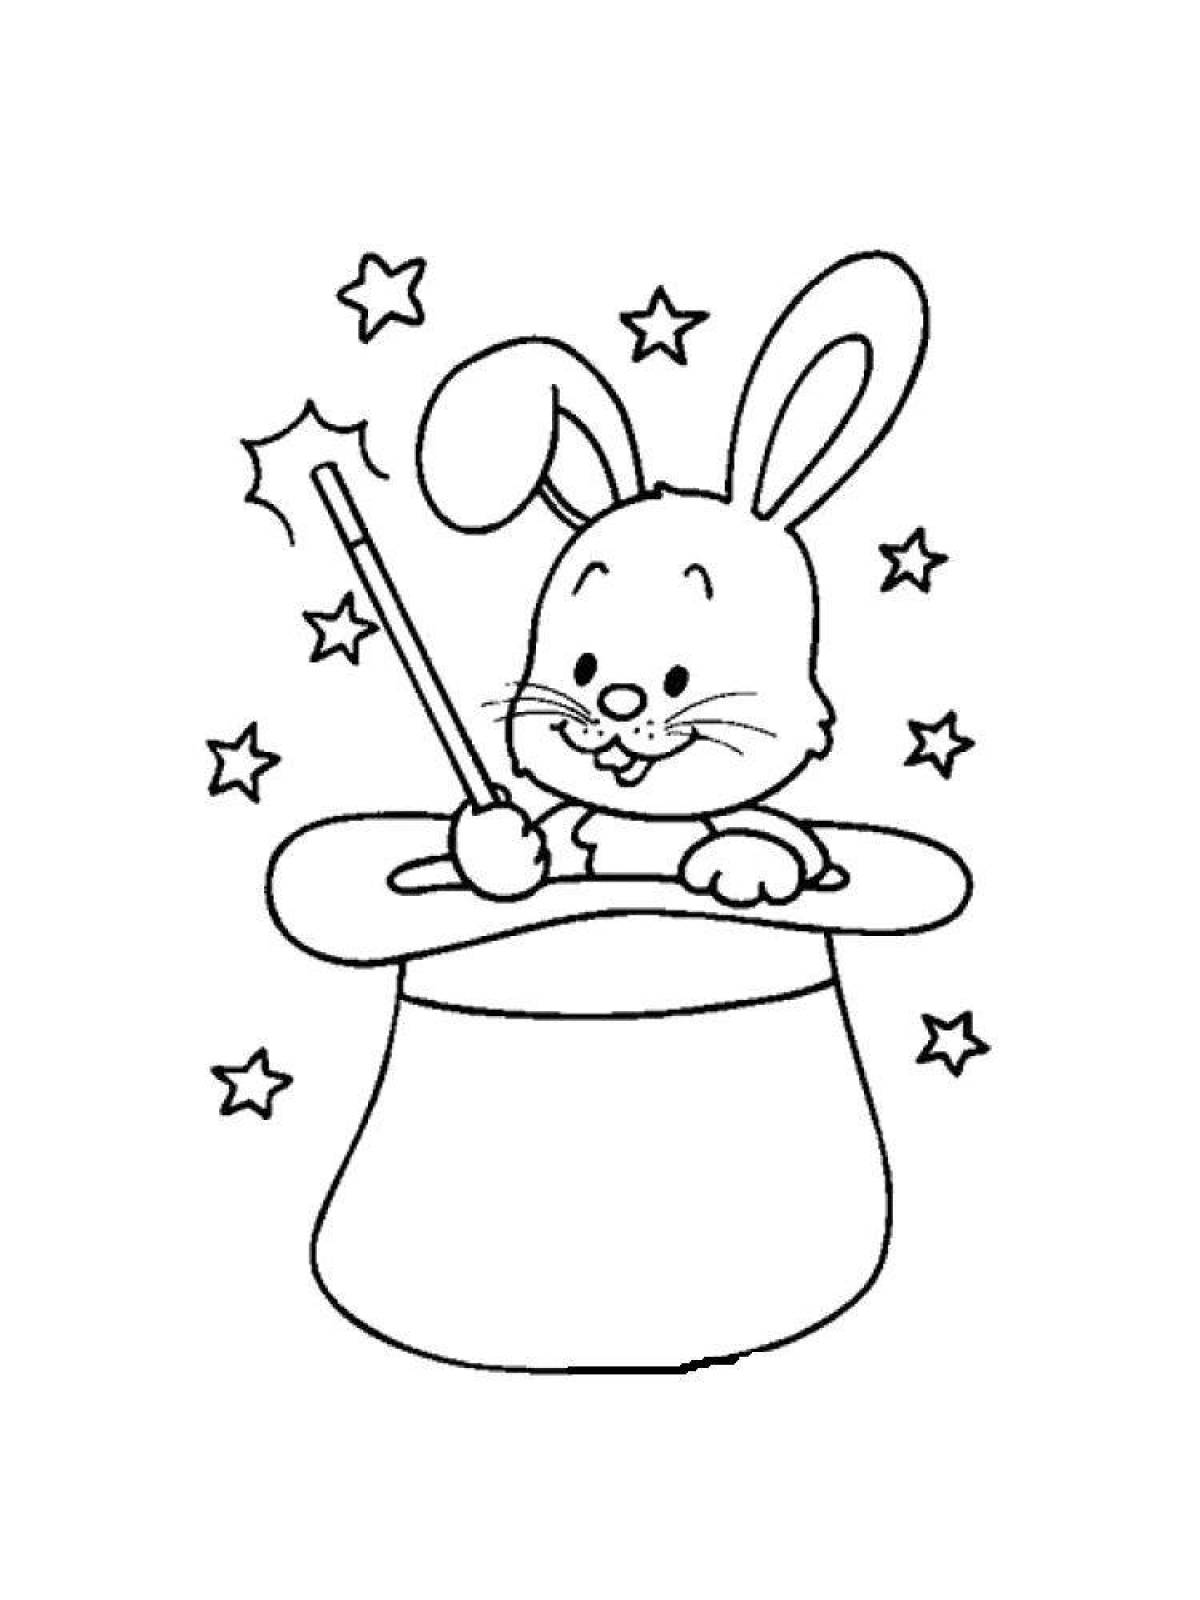 Exciting year of the rabbit coloring book